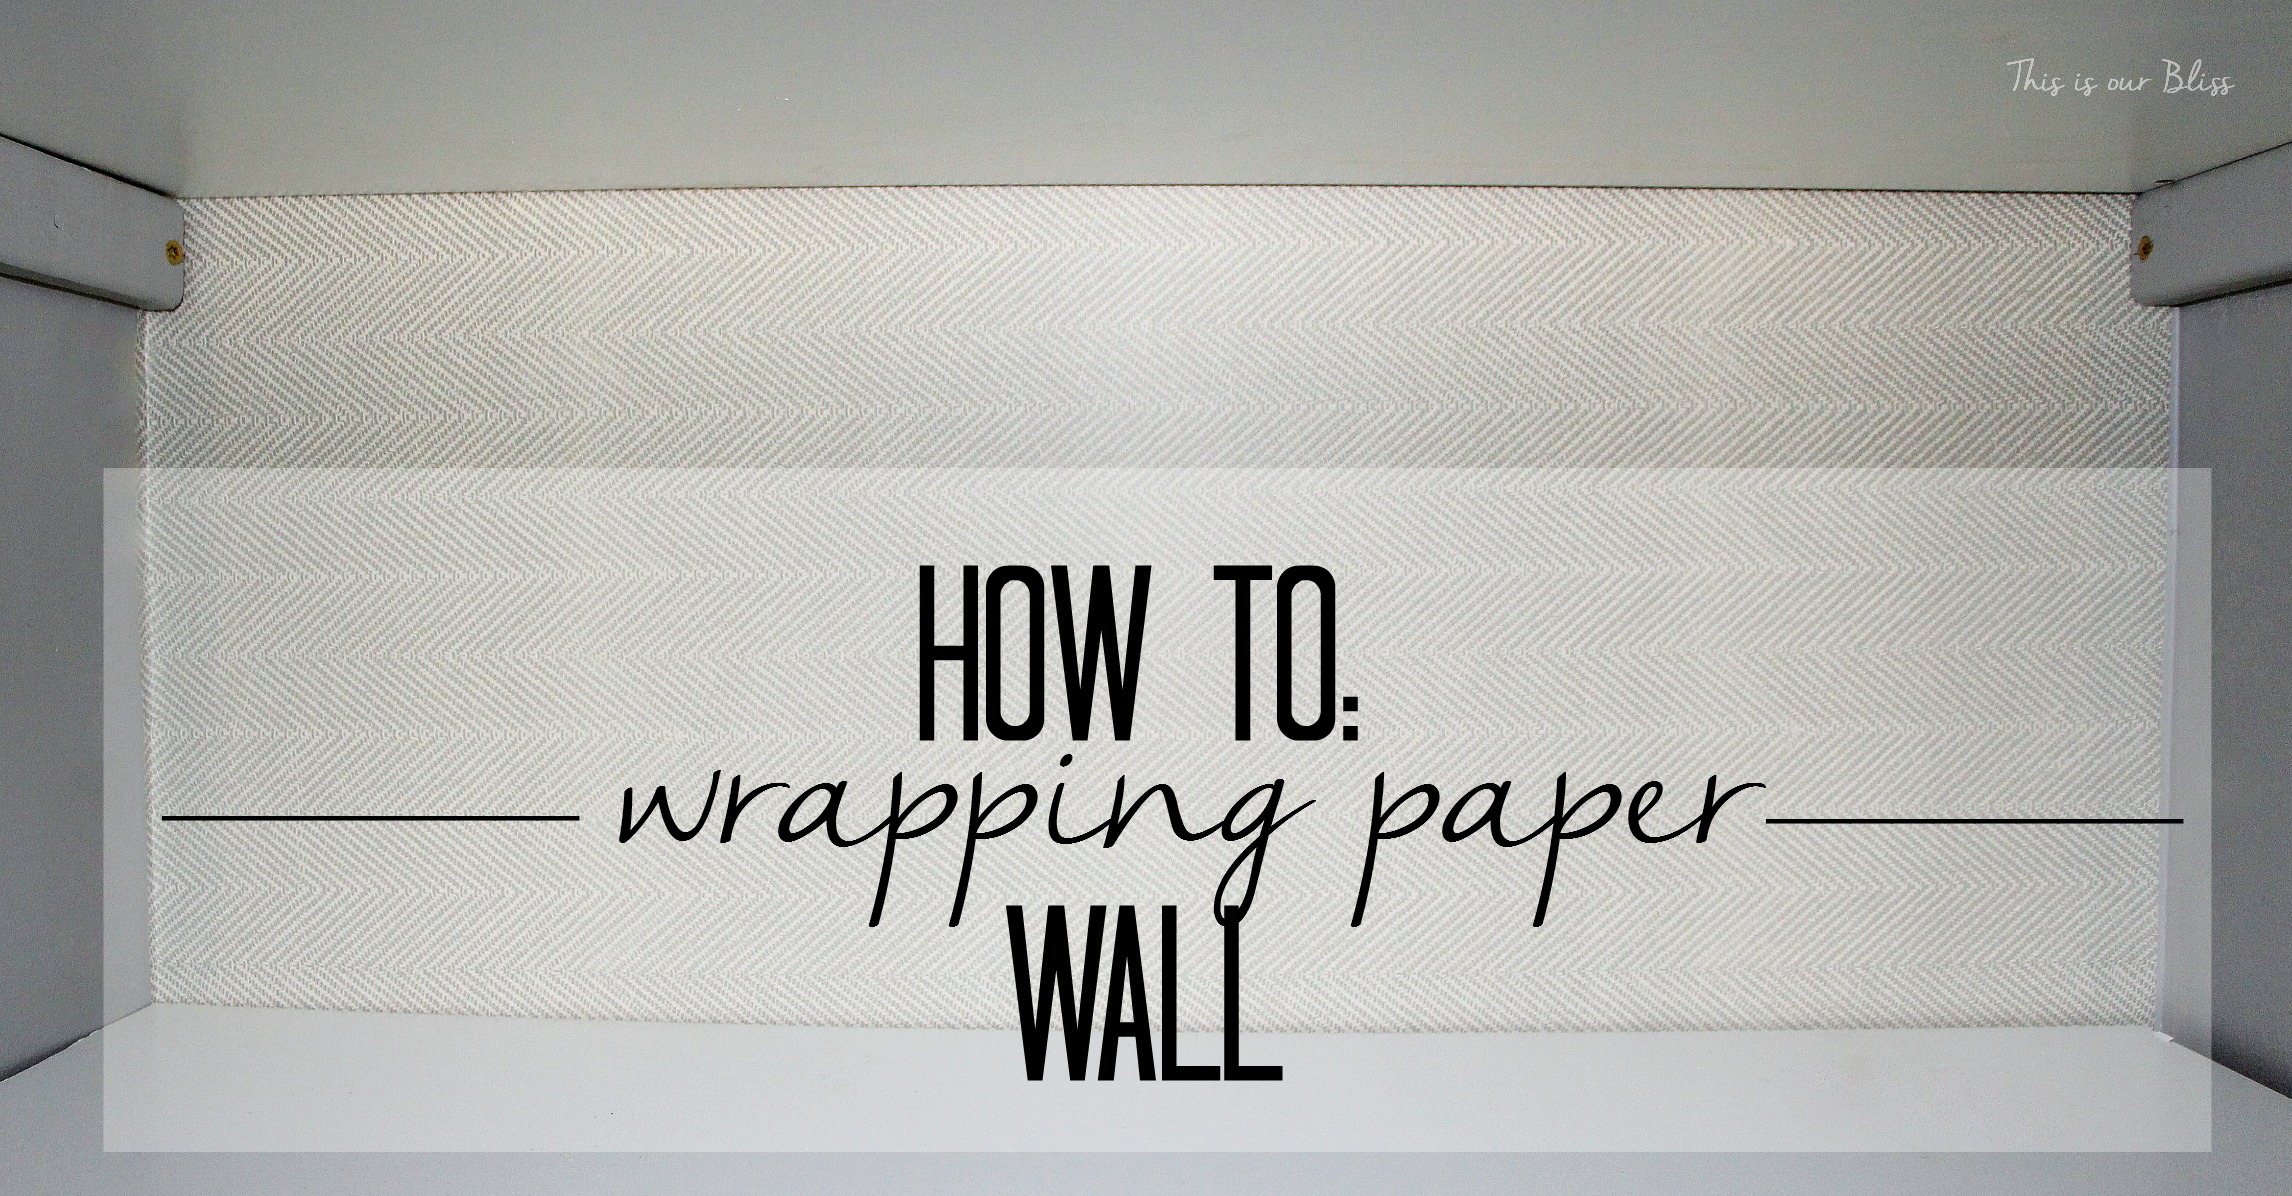 How to - wrapping paper wall - DIY wall convering - This is our Bliss